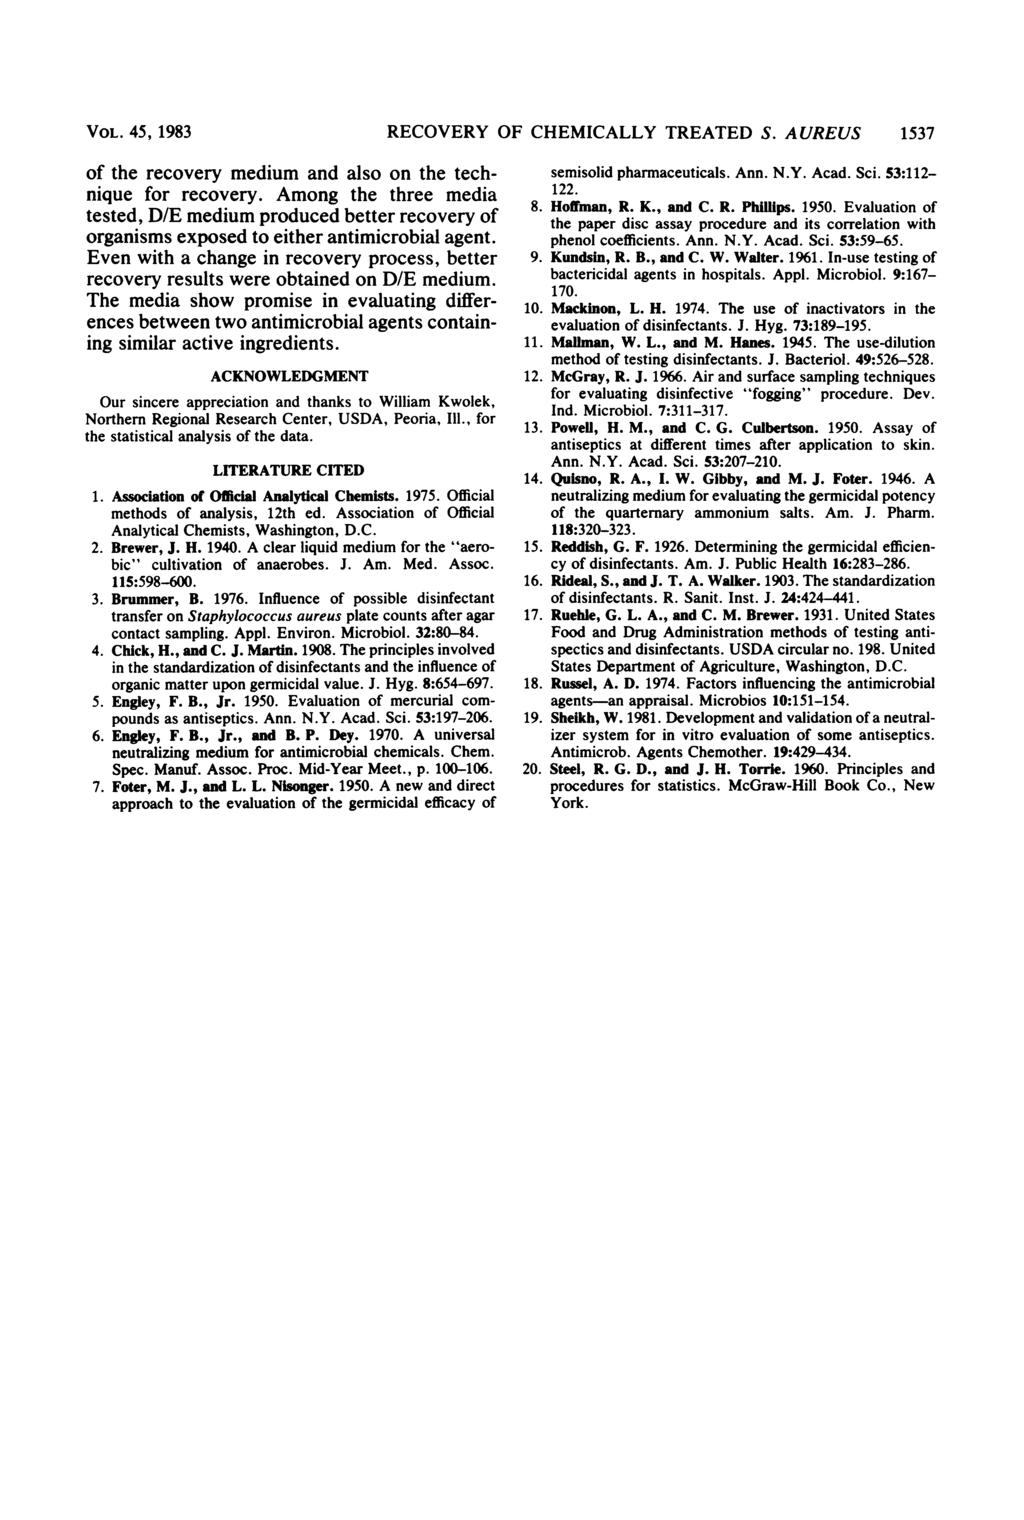 VOL. 5, 1983 of the recovery medium and also on the technique for recovery. Among the three media tested, medium produced better recovery of organisms exposed to either antimicrobial agent.